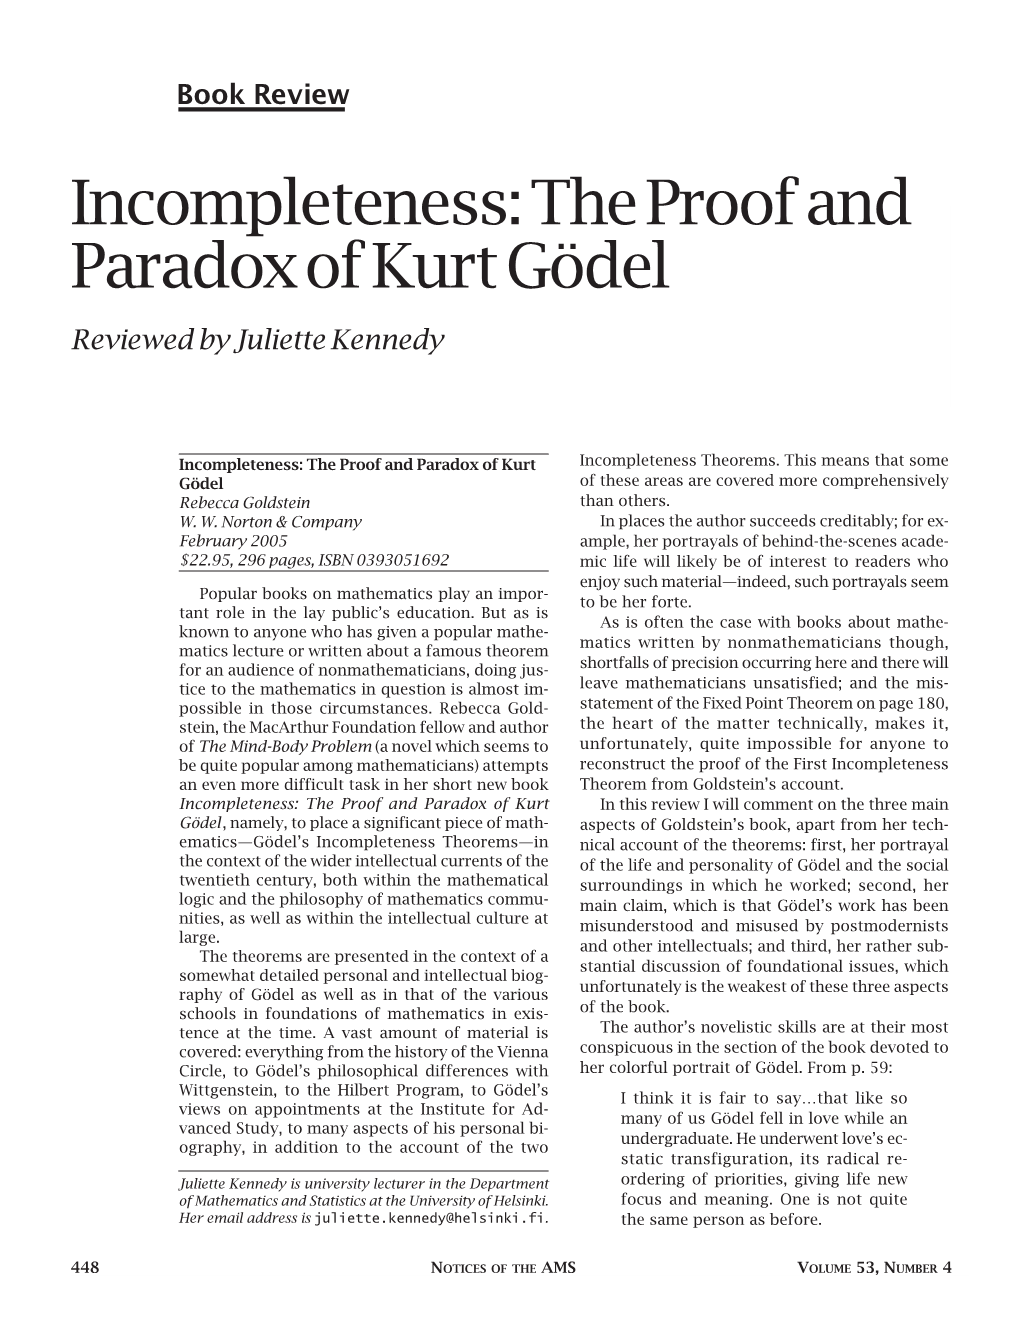 Incompleteness: the Proof and Paradox of Kurt Gödel